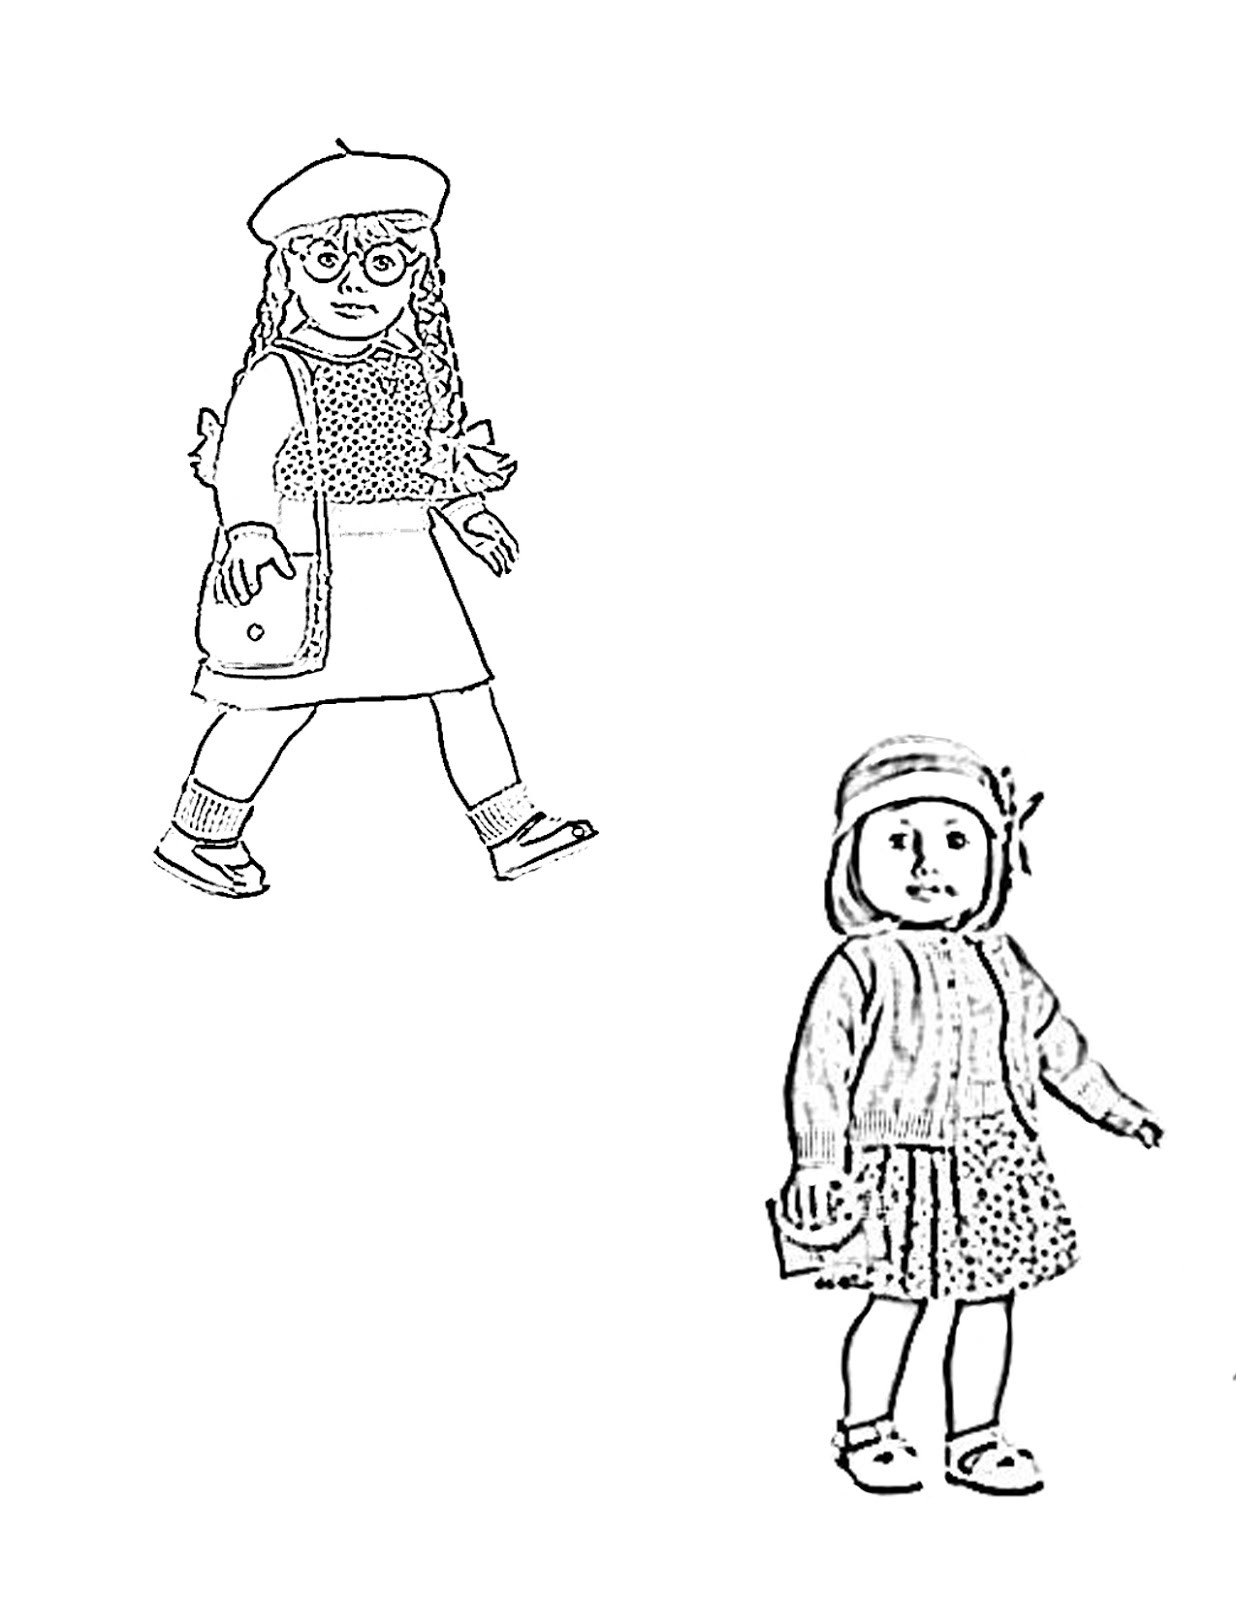 Free American Girl Coloring Pages
 My Cup Overflows Kit Kittredge An American Girl